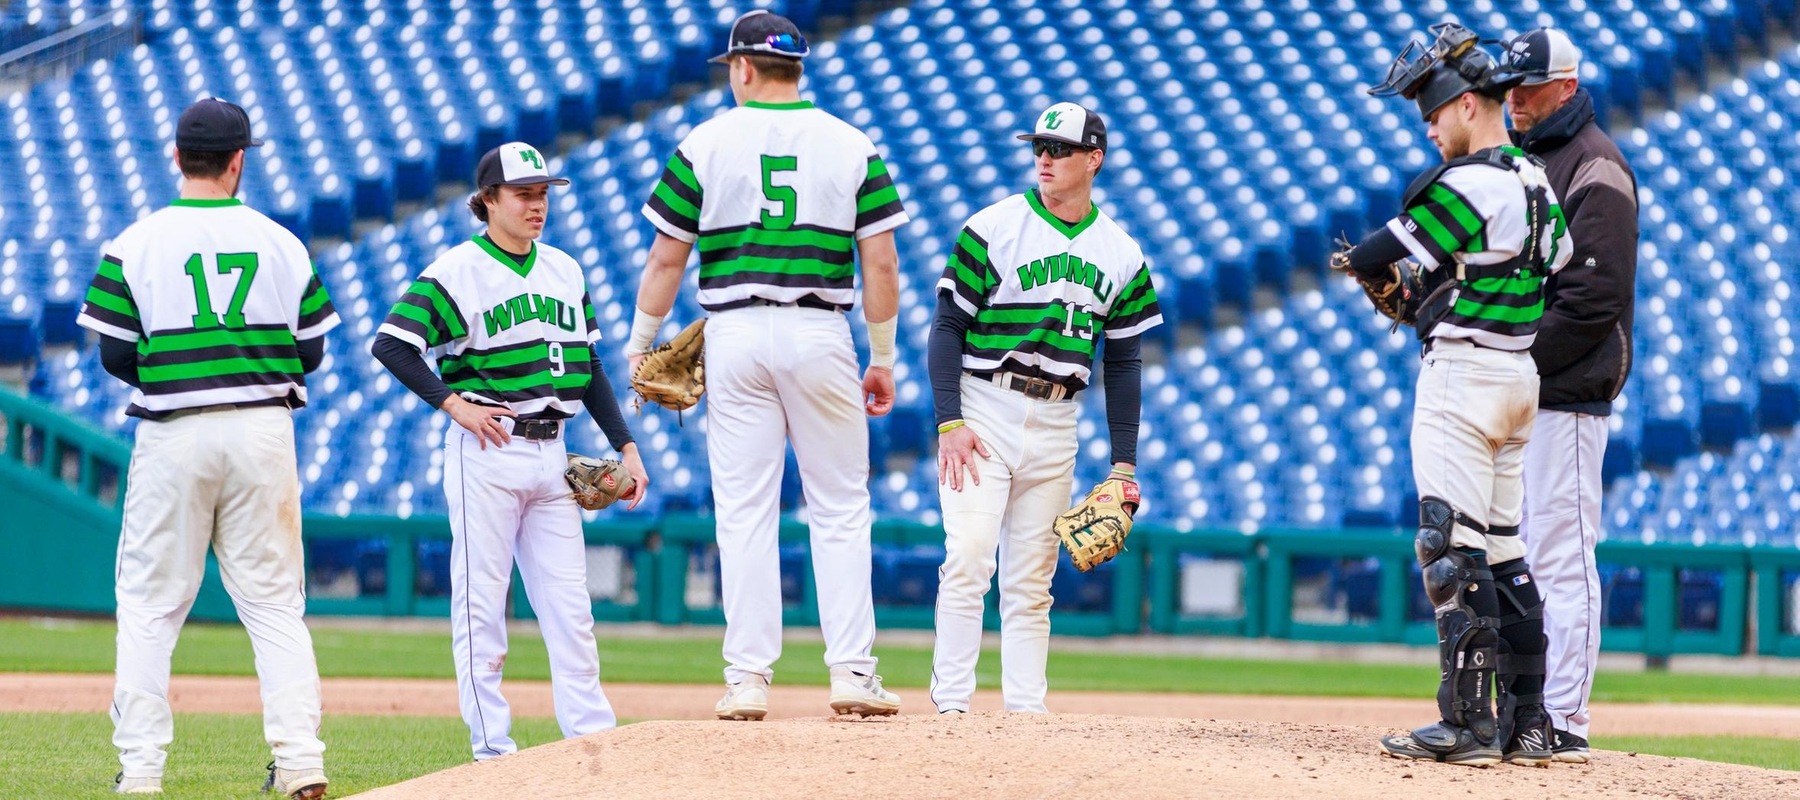 Copyright 2022; Wilmington University. All rights reserved. Photo by Chris Vitale. April 19, 2022 vs. West Chester at Citizens Bank Park.